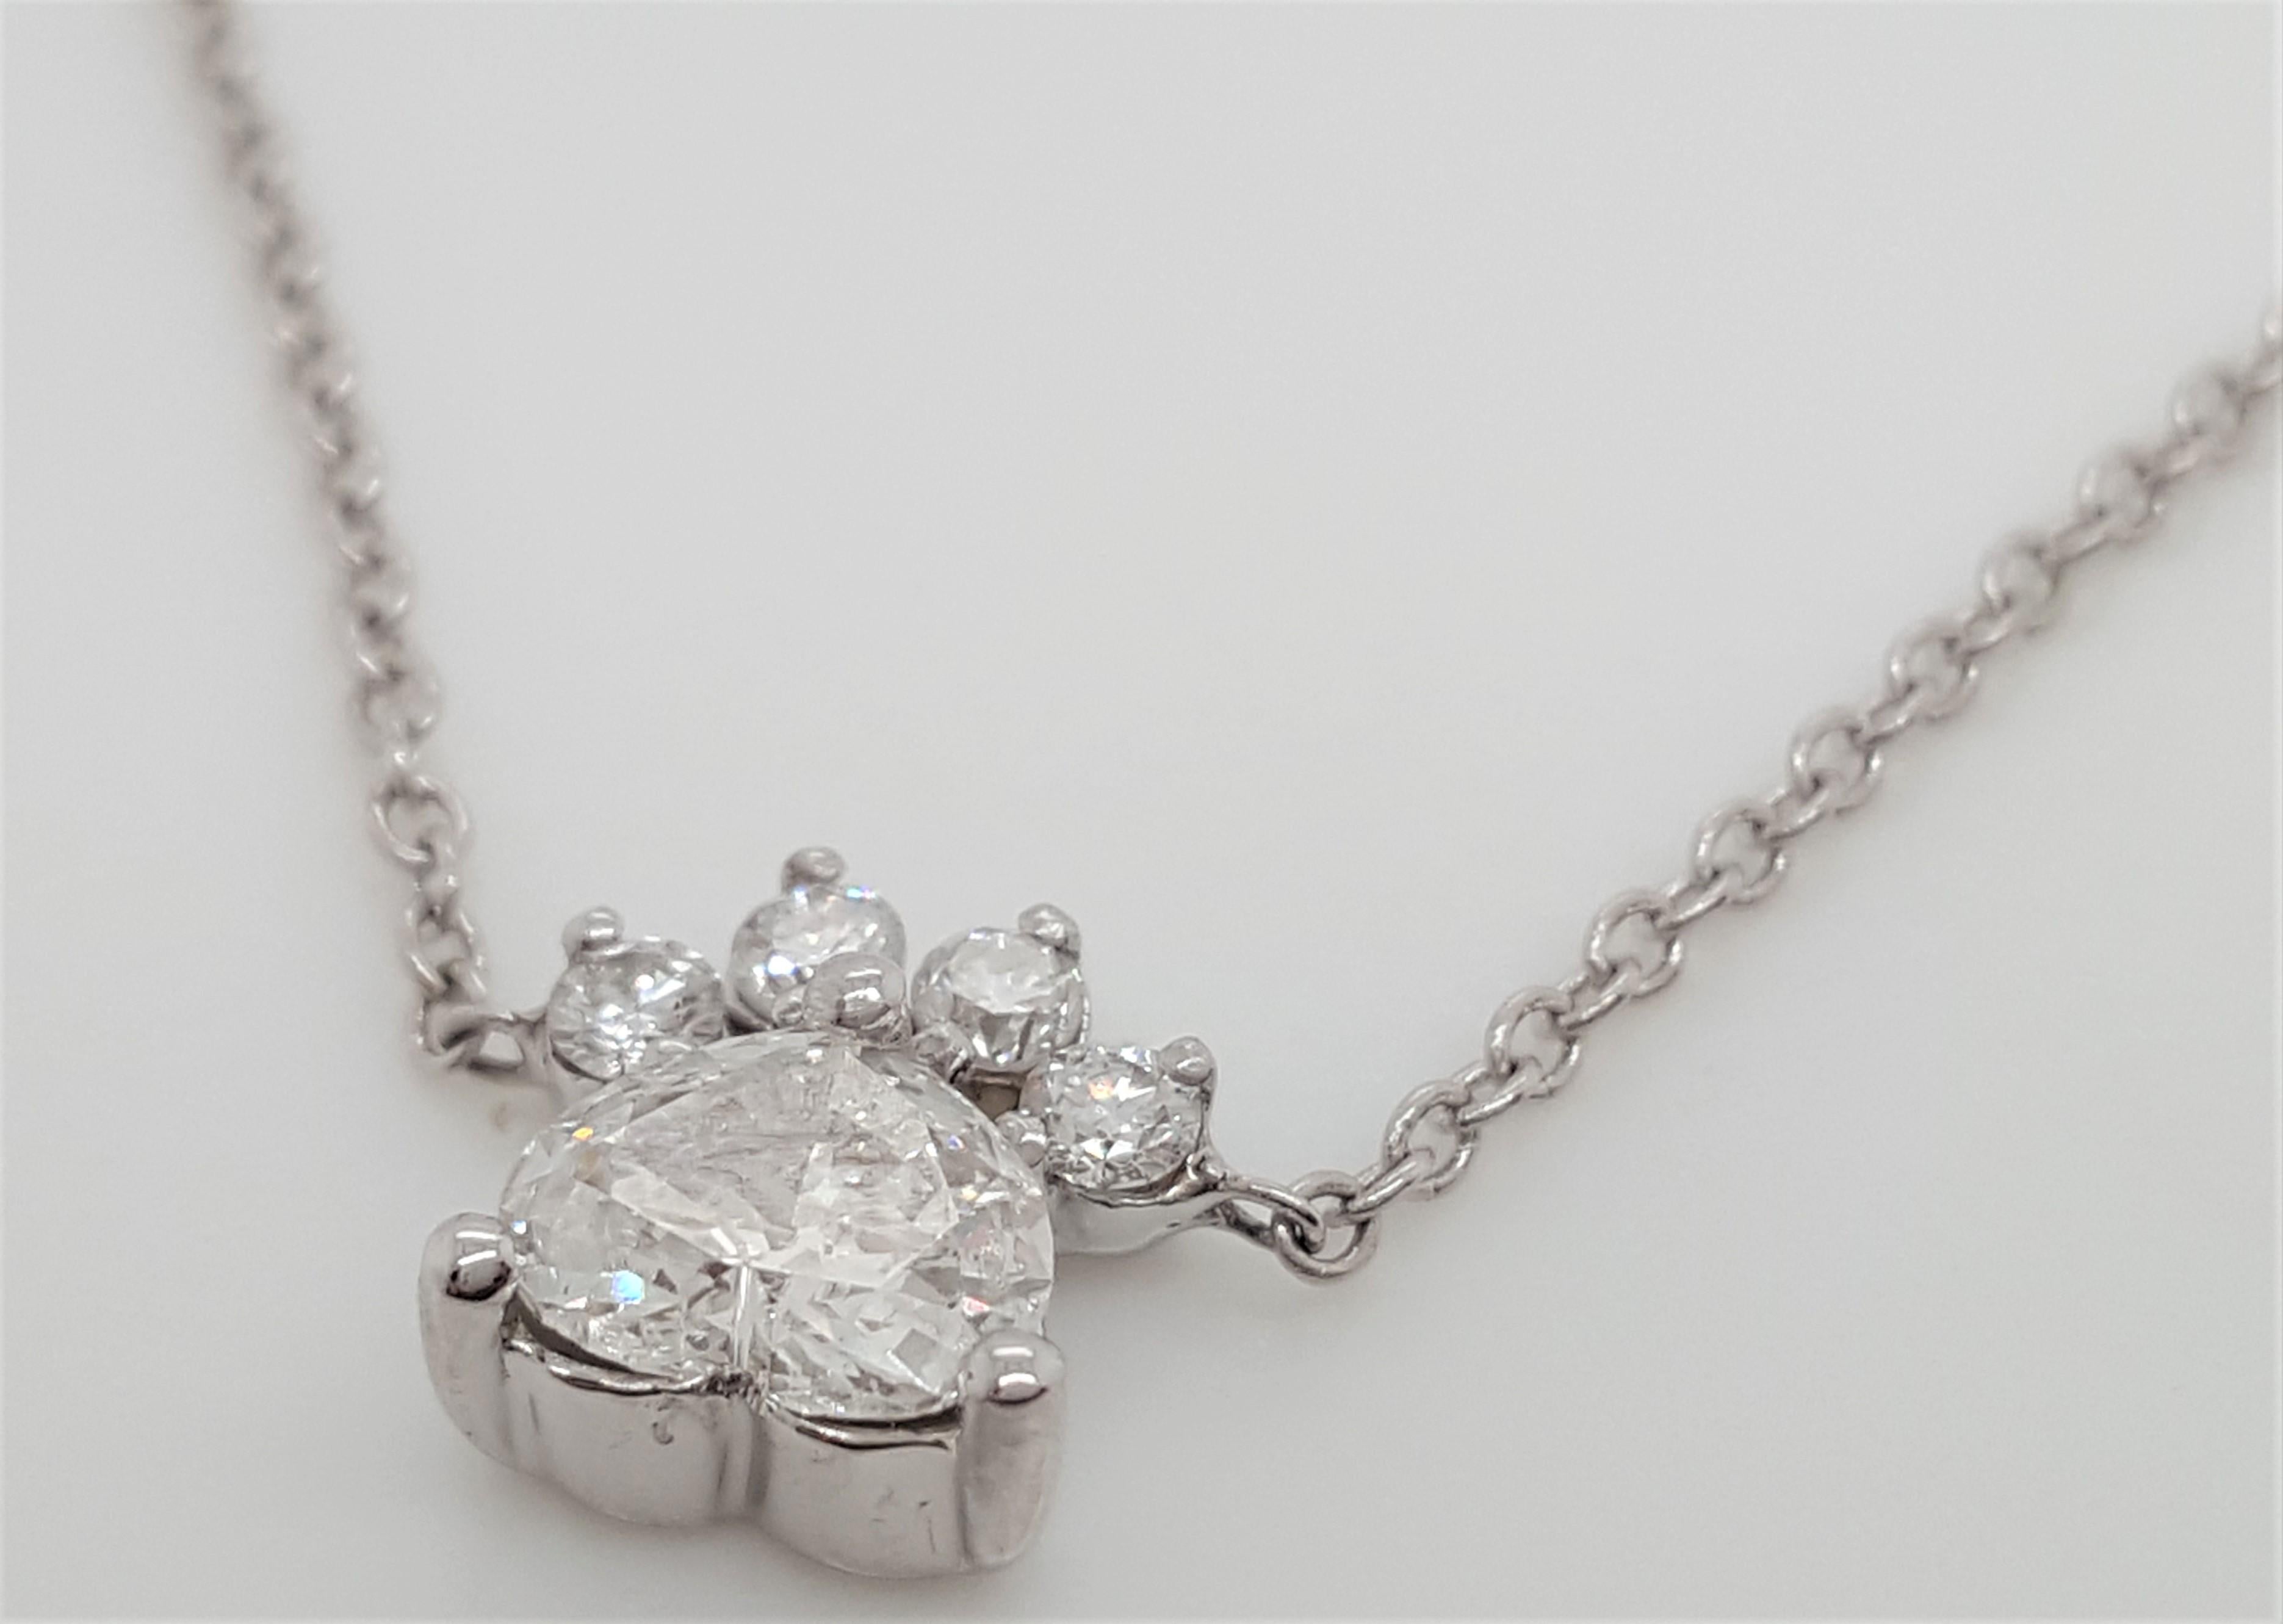 The Dog Paw Pendant Necklace includes a 0.33 carat heart  cut diamond center set in a basket setting hugged by 3 prongs and 4 Round Brilliant Cut Diamonds 0.06 ct tw  It is hanging on a 18K white gold 18” Cable chain. It is the perfect everyday